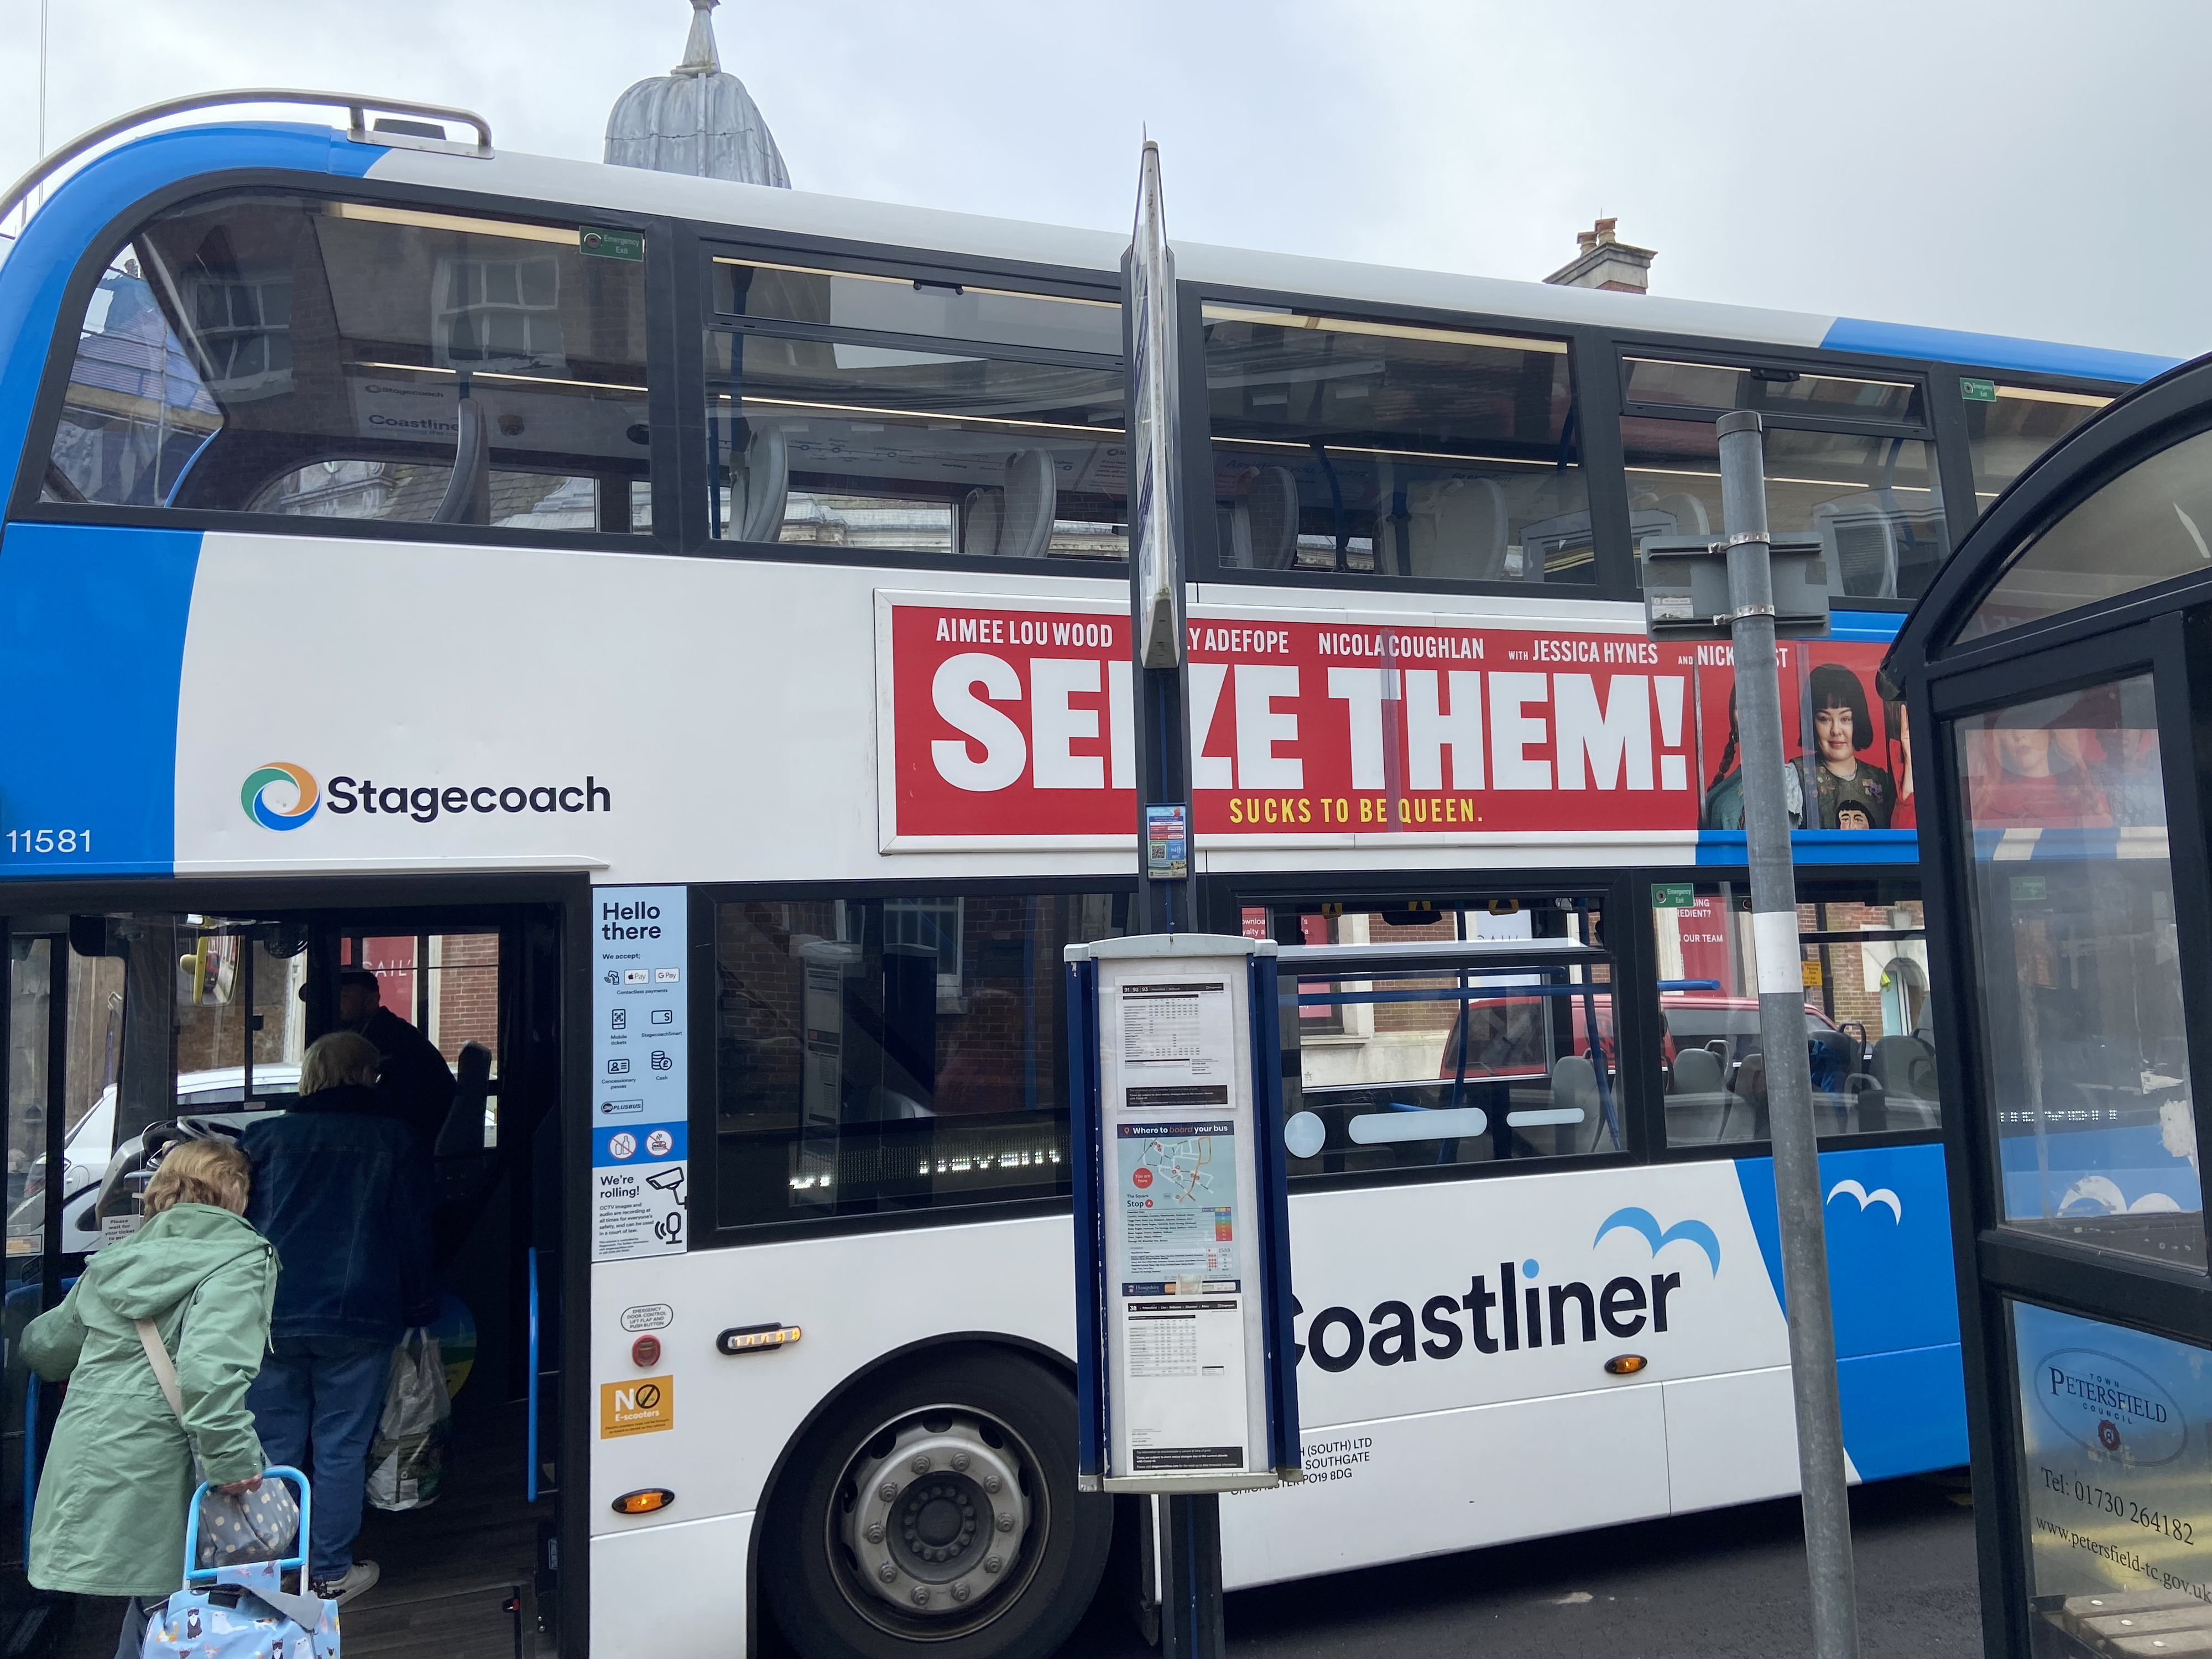 Local Parish Council wants to keep their local number 67 bus